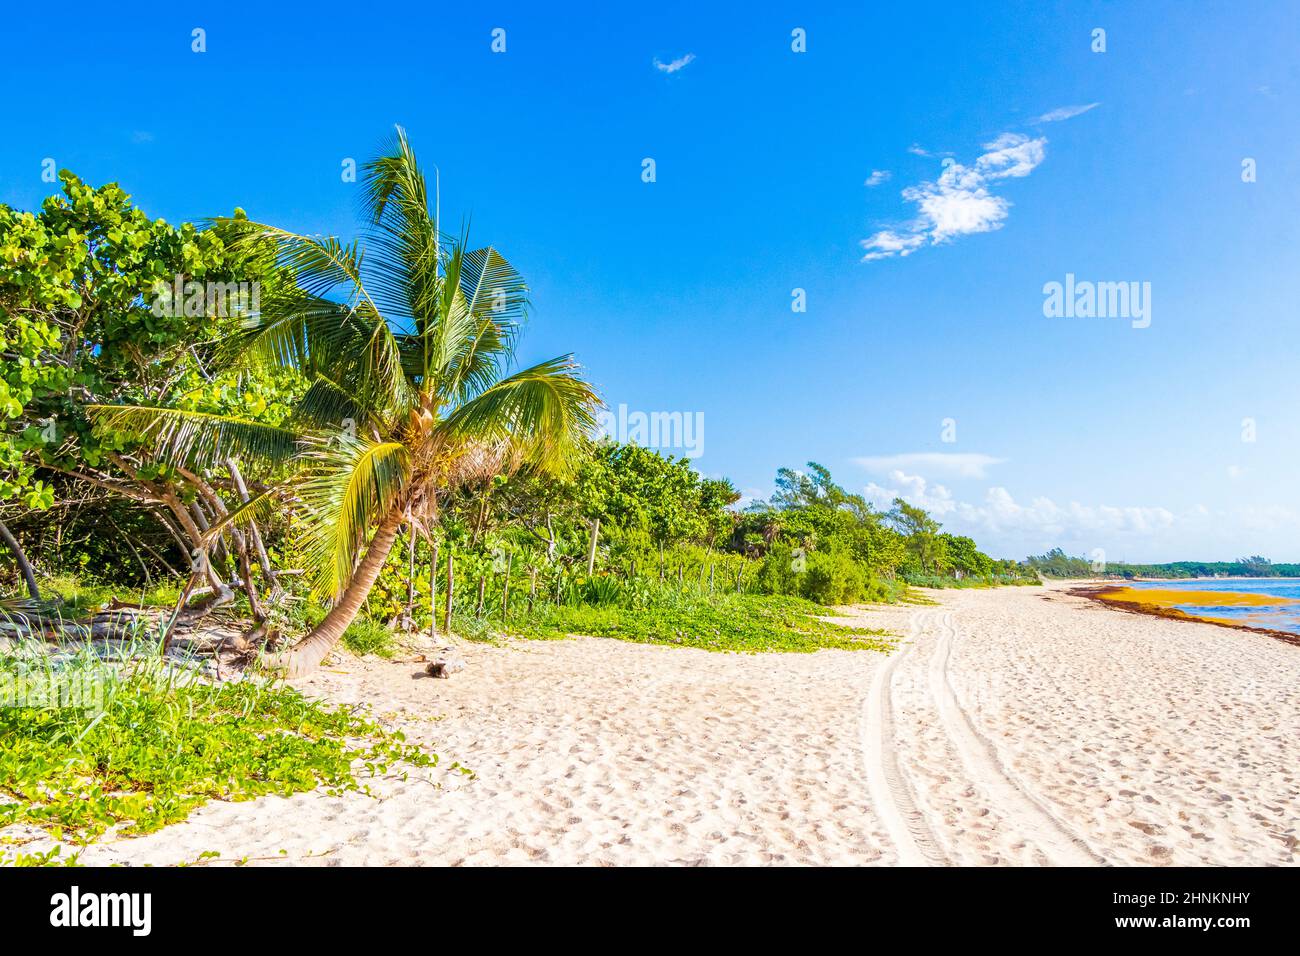 Nature and palm trees at tropical mexican beach 88 Punta Esmeralda in Playa del Carmen Mexico. Stock Photo